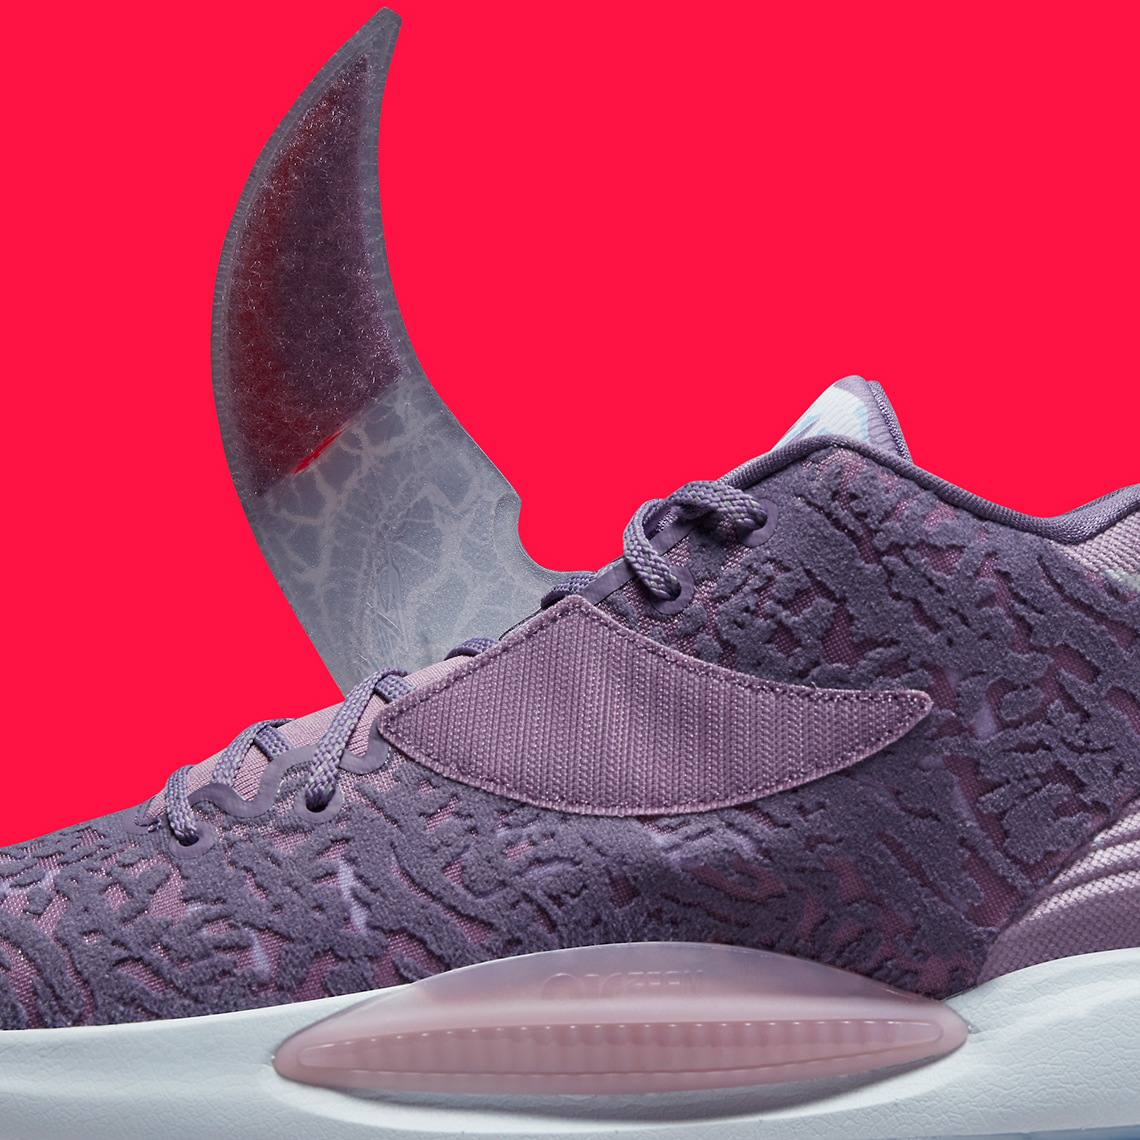 Nike Kd 14 Valentines Day Release Date 5